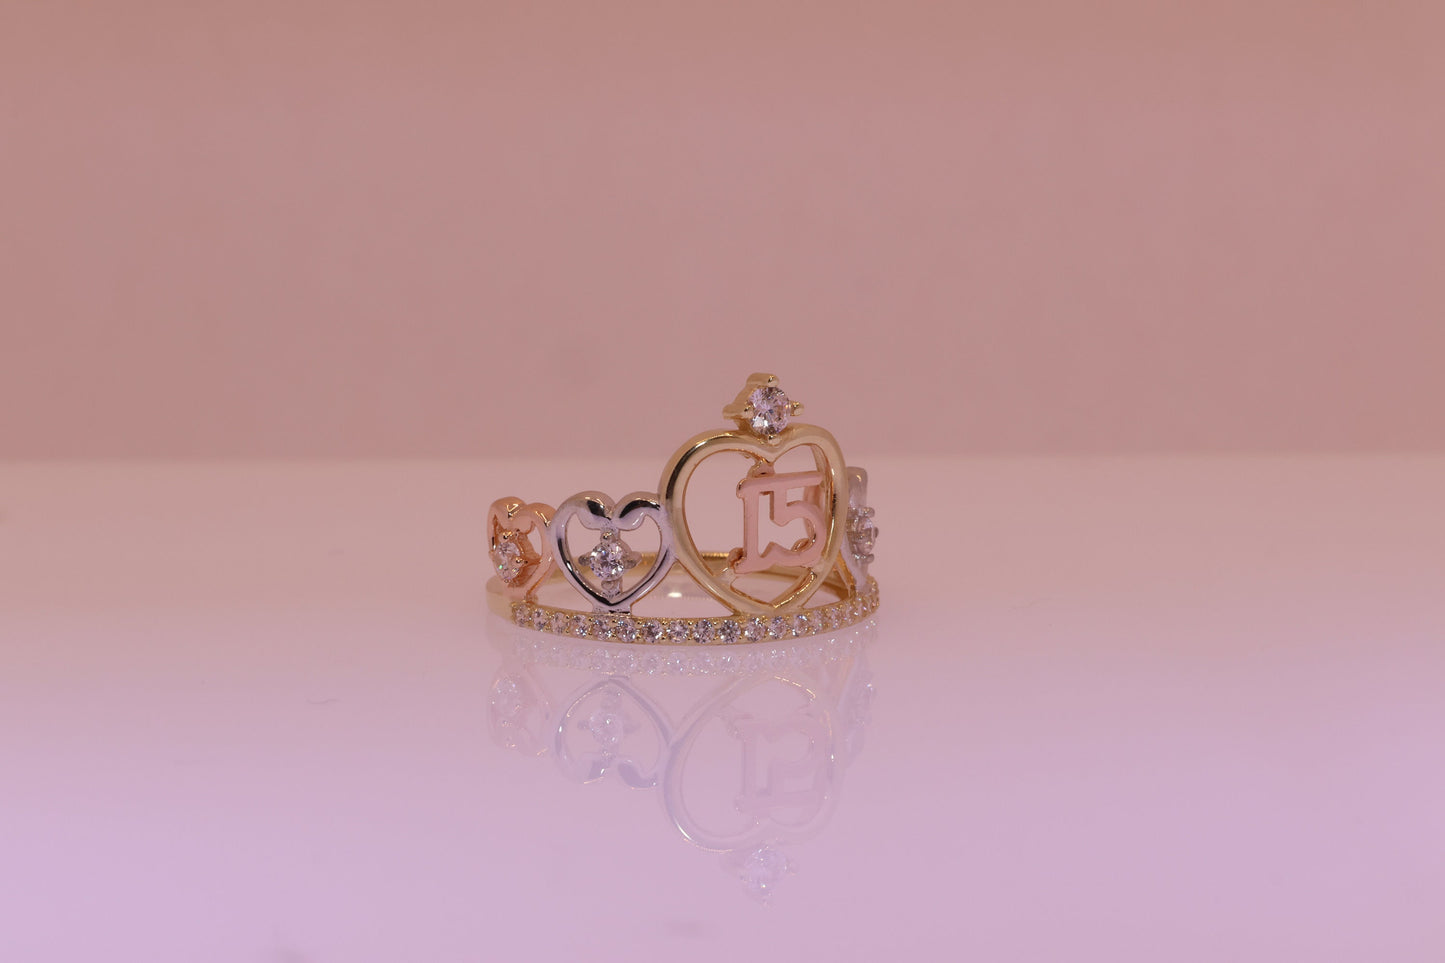 14K Gold 15 Anos Quinceanera Crown Ring VV